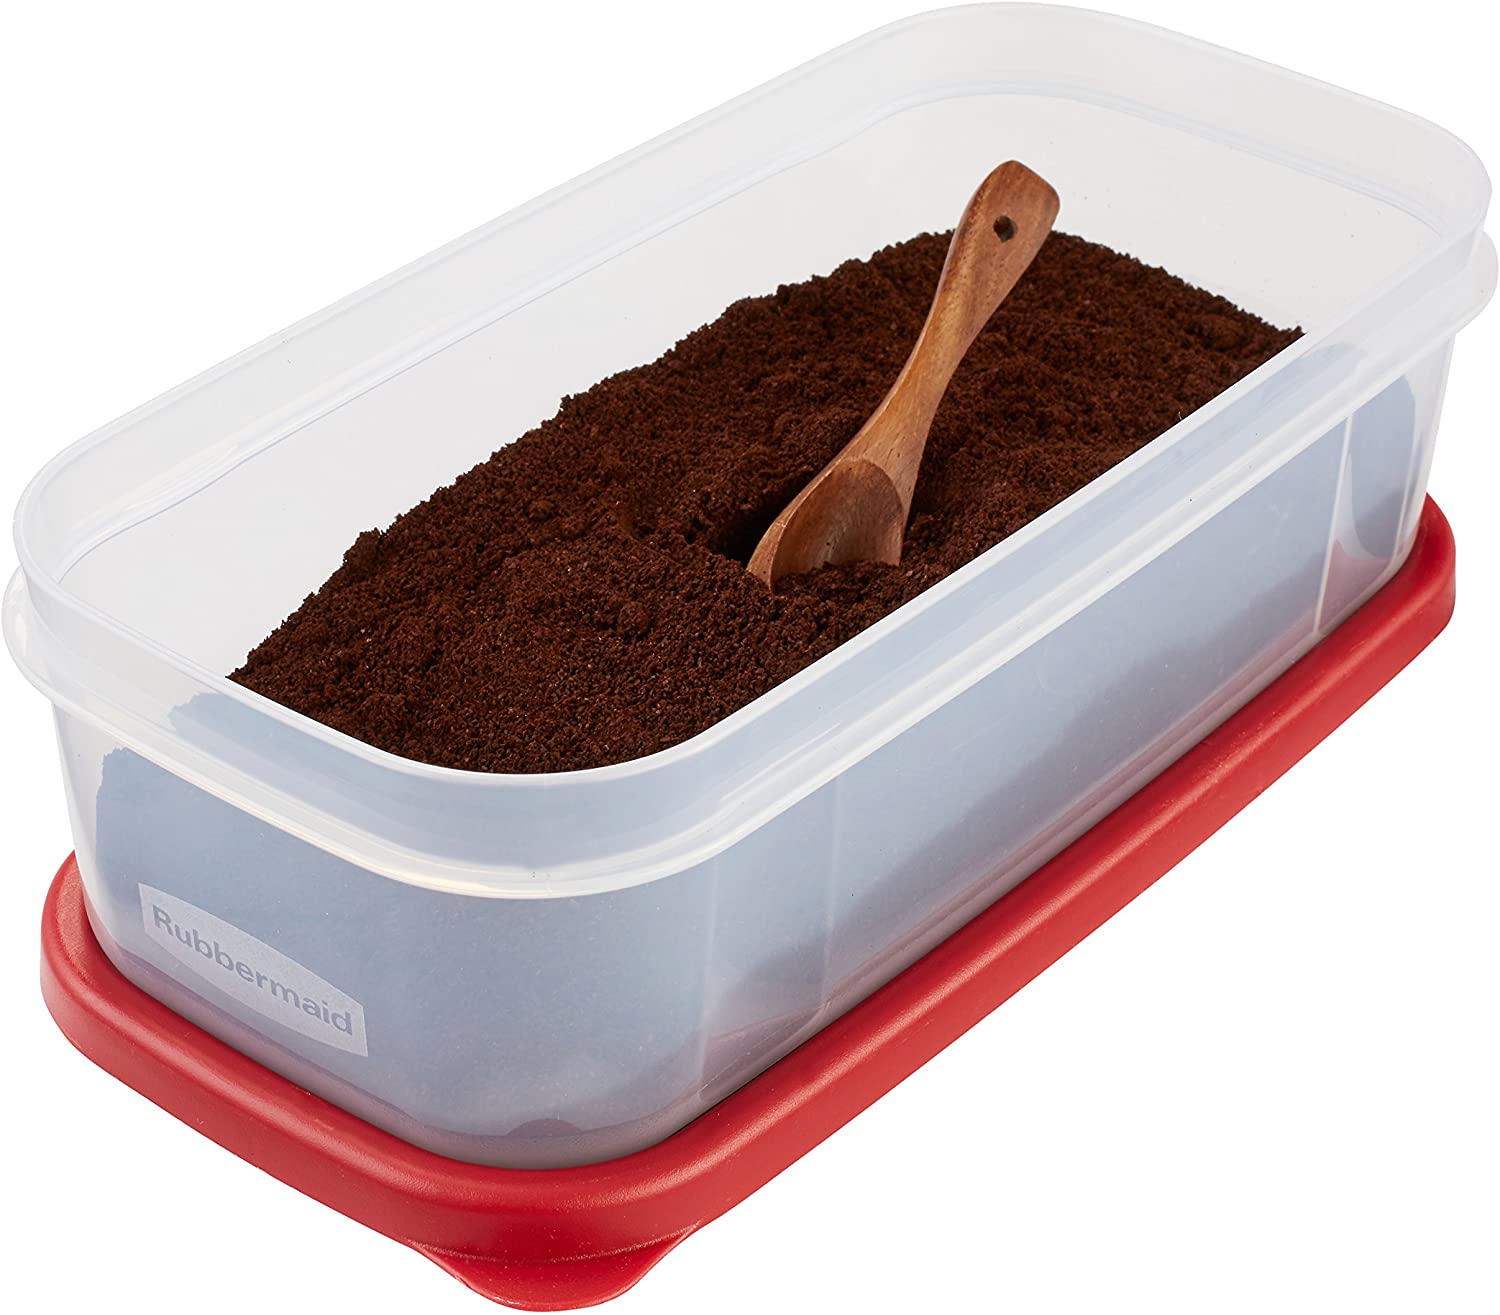 Rubbermaid Dry Food Container, Brown Sugar, 1.18 L - Whole and All